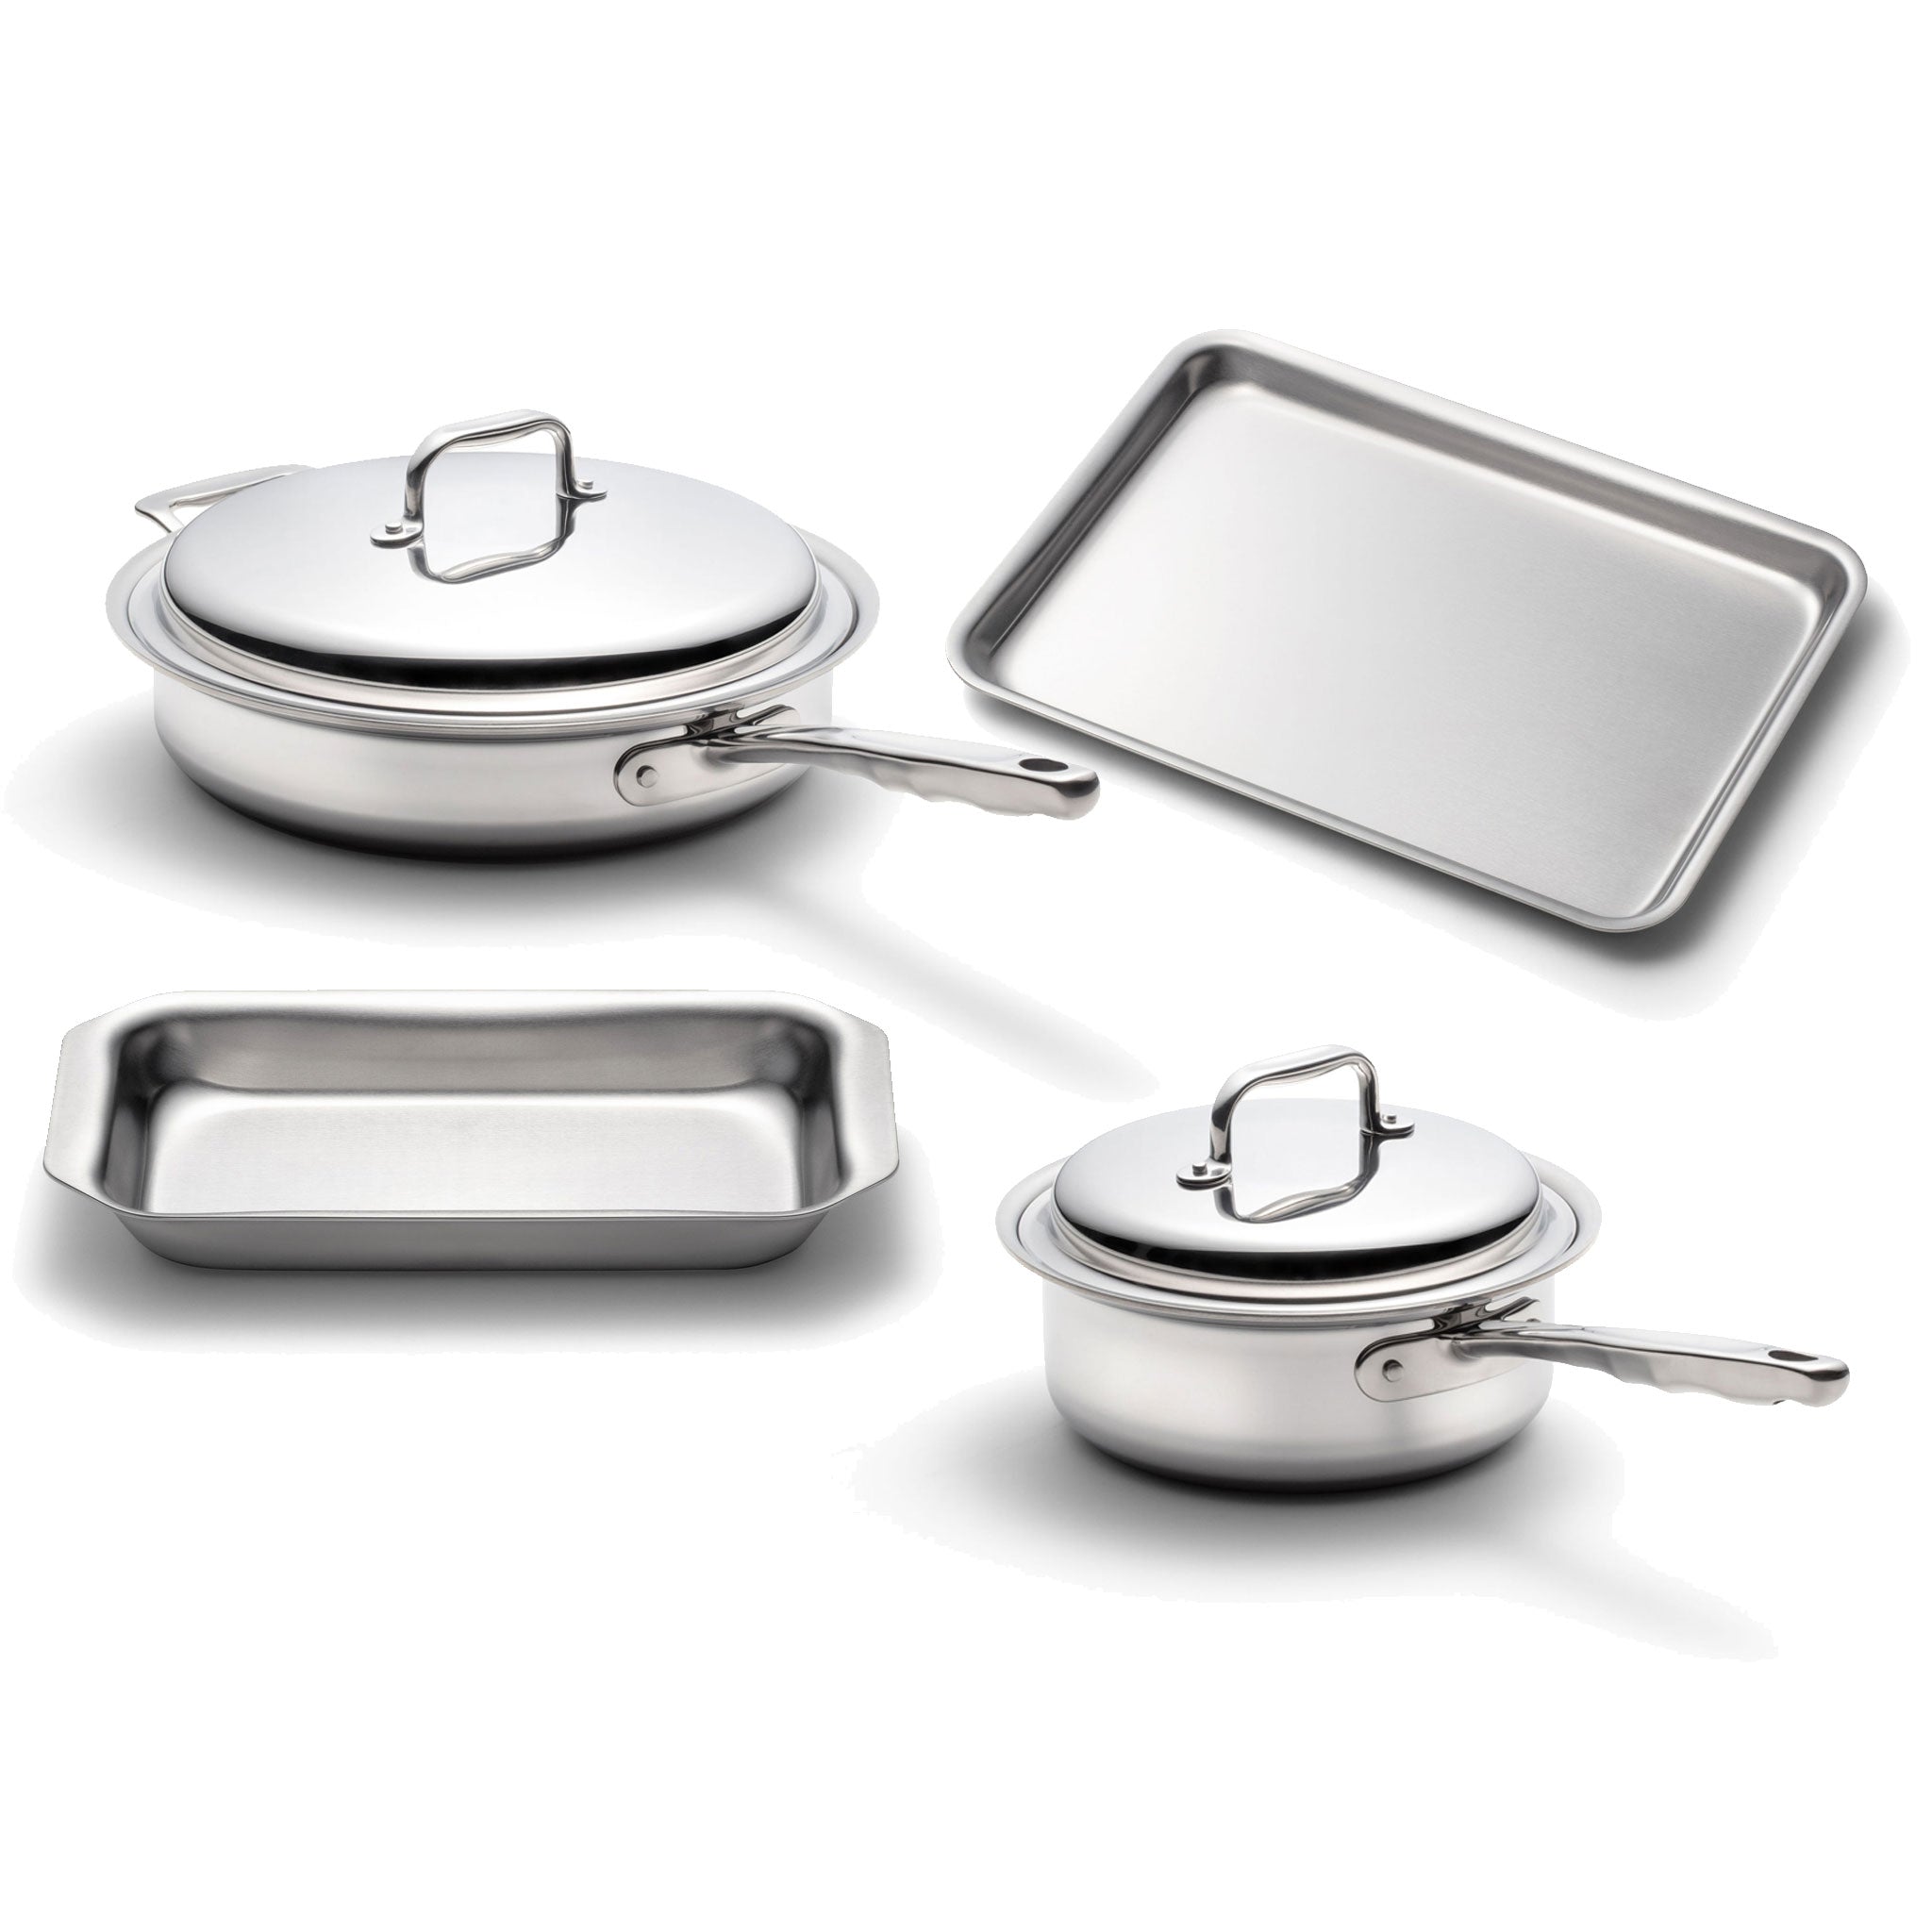 6-Piece Meal Delivery Set For 4